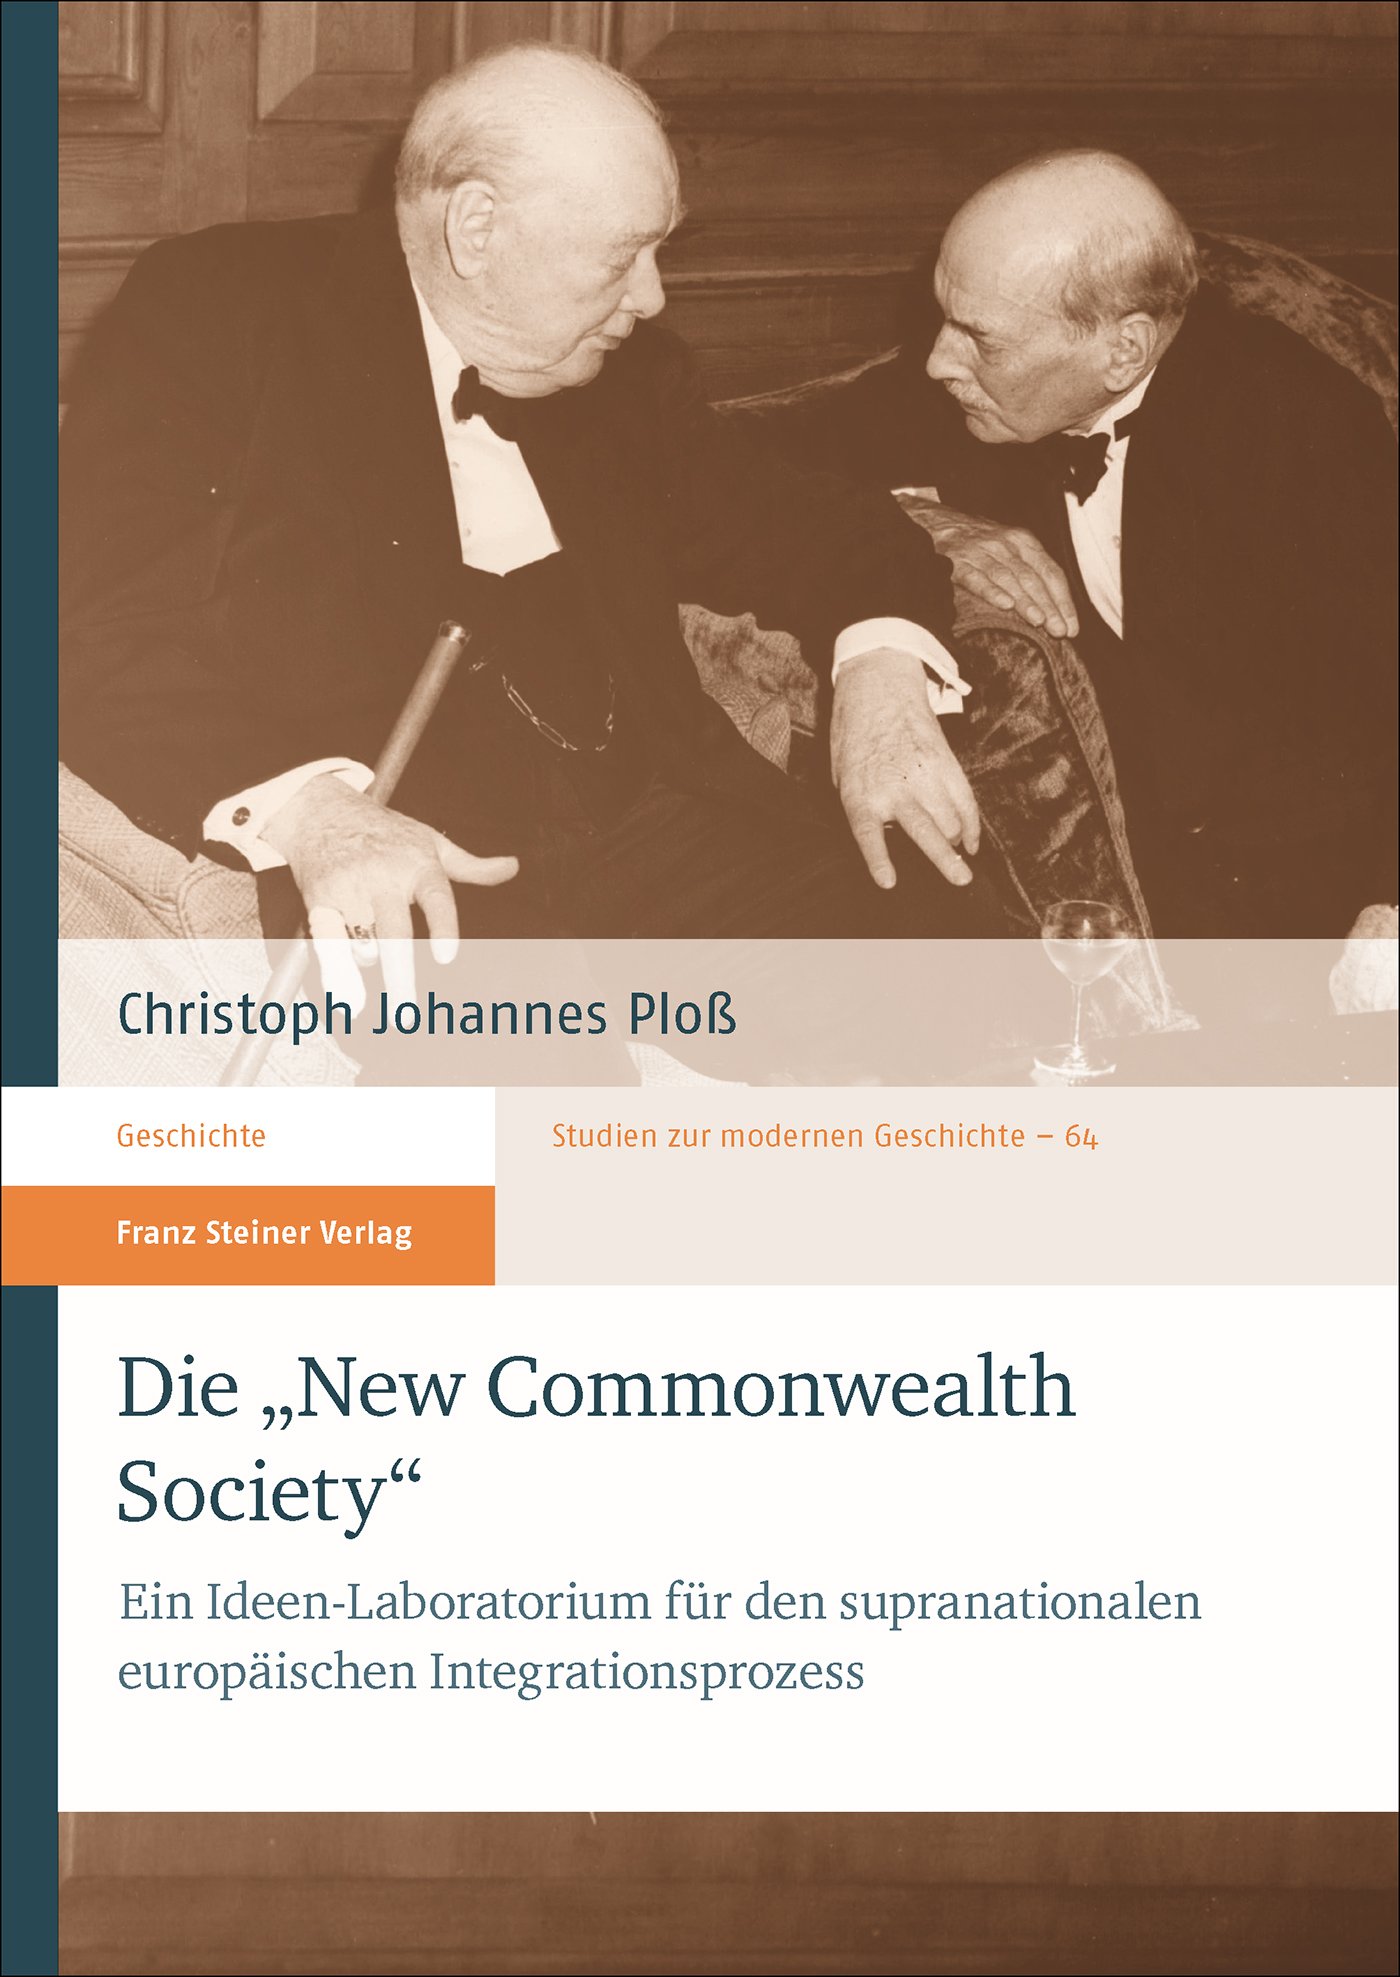 Die "New Commonwealth Society"